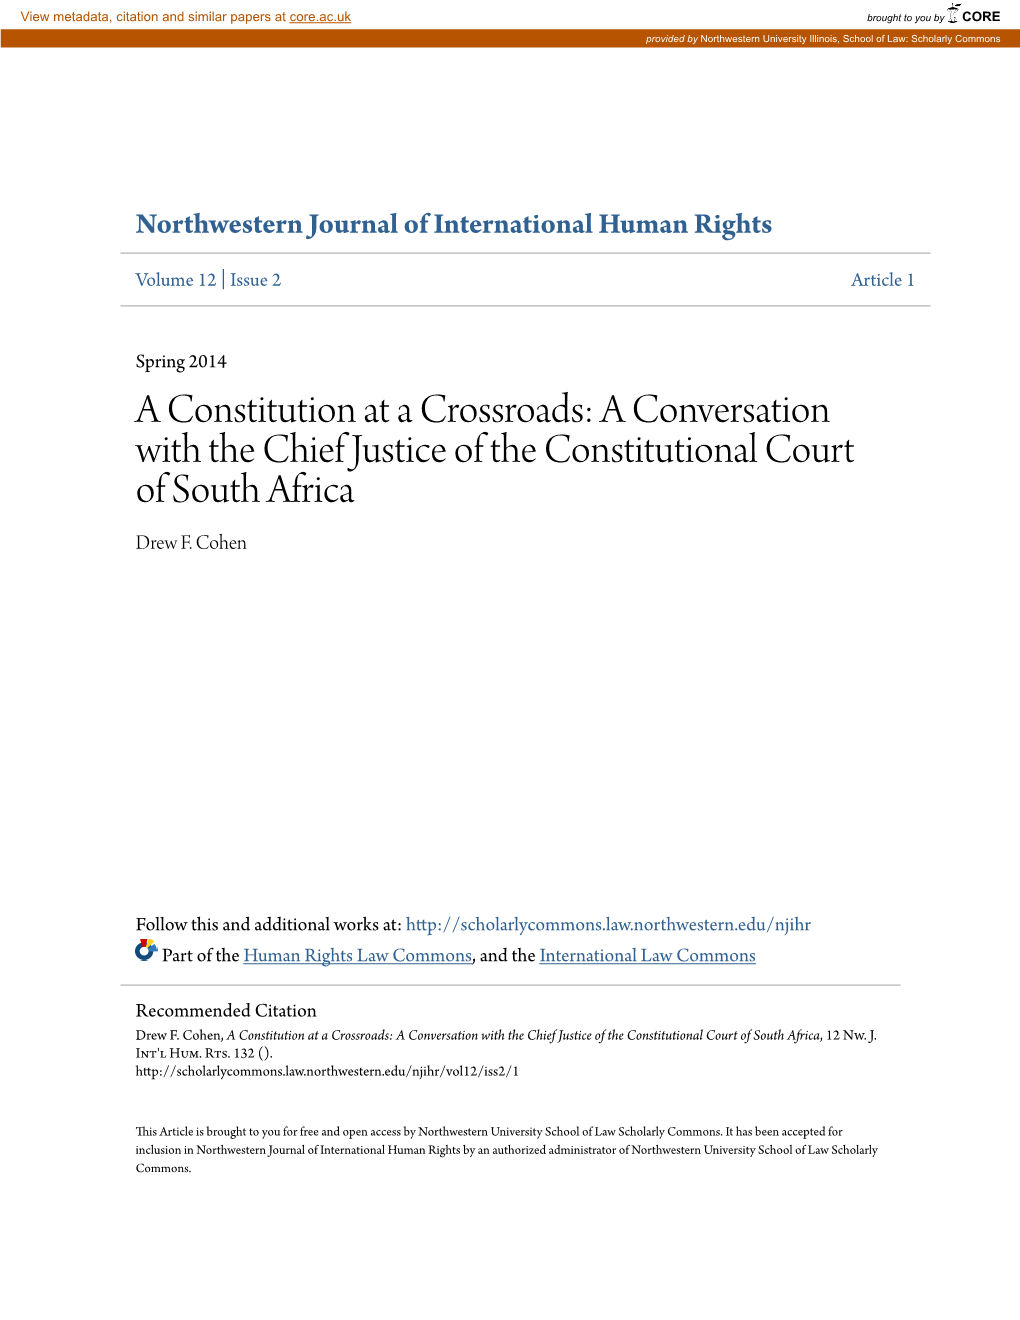 A Conversation with the Chief Justice of the Constitutional Court of South Africa Drew F